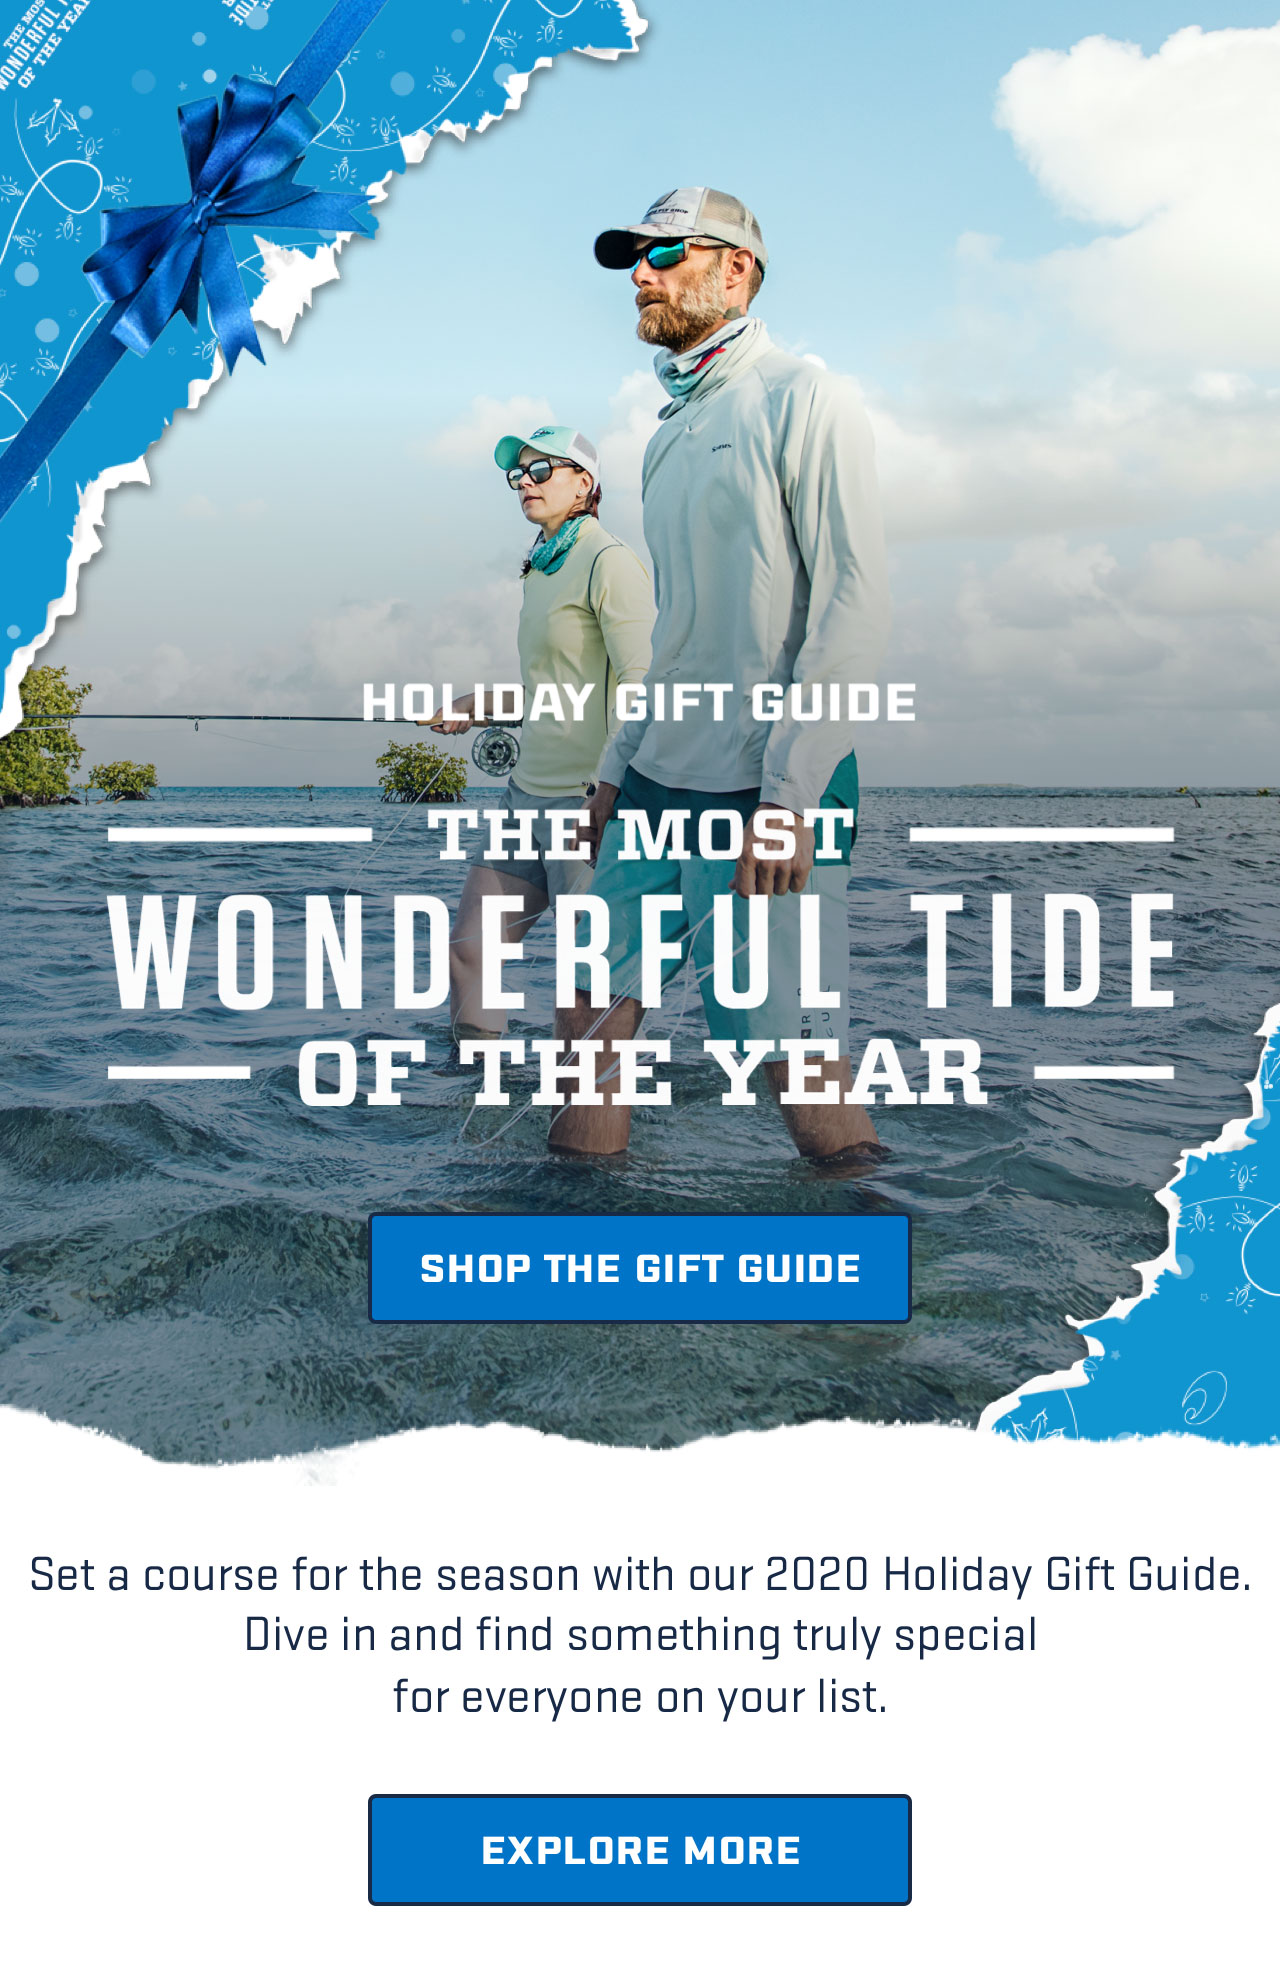 


HOLIDAY GIFT GUIDE
THE MOST WONDERFUL TIDE OF THE YEAR

[ SHOP THE GIFT GUIDE ]

Set a course for the season with our 2020 Holiday Gift Guide. 
Dive in and find something truly special
for everyone on your list.

[ EXPLORE MORE ]

									